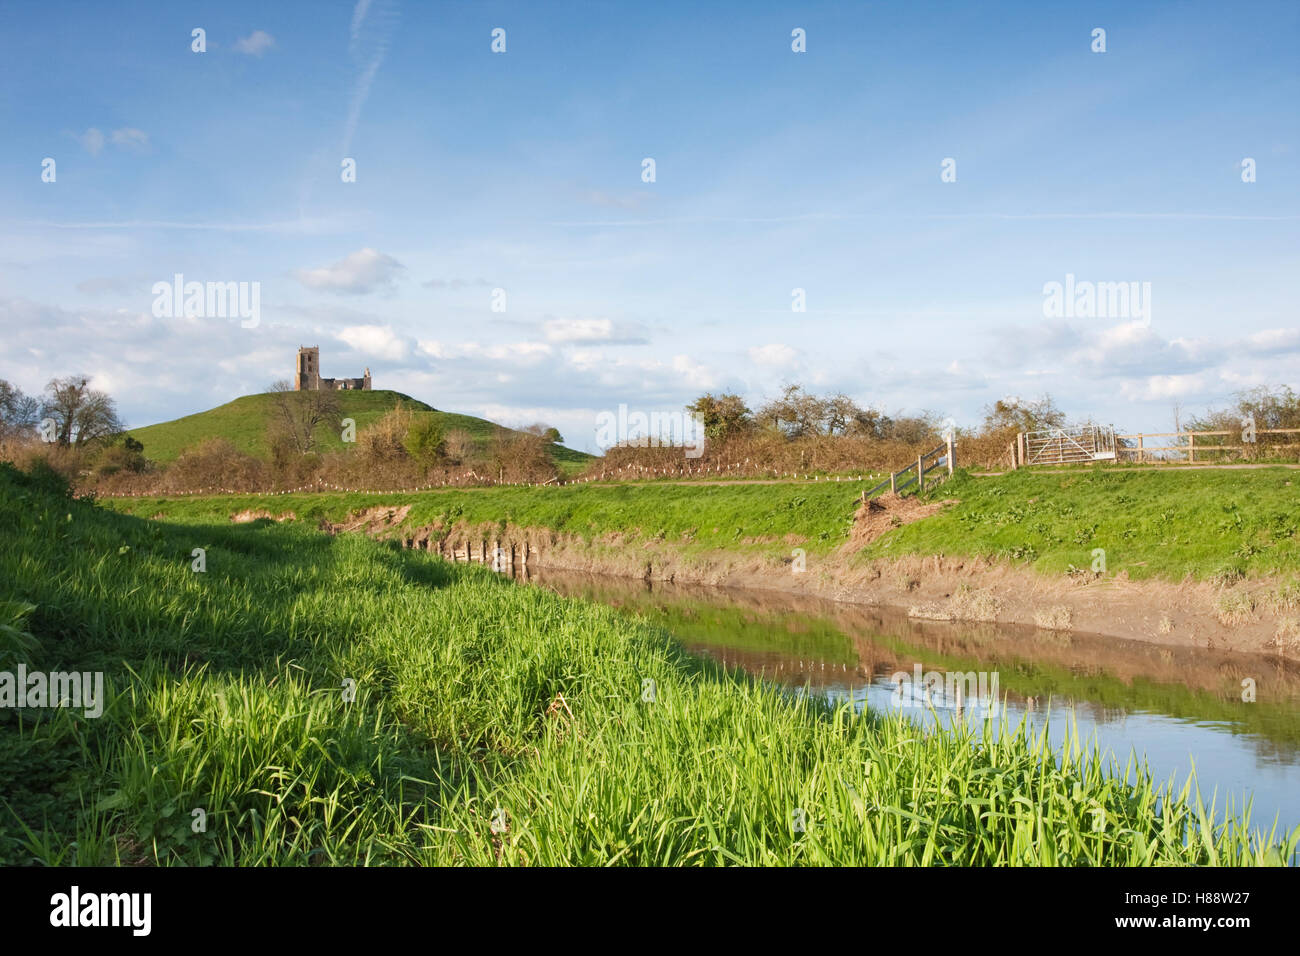 View of Burrow Mump in the early evening, with the River Parrett in the foreground, Somerset, England, United Kingdom, Europe Stock Photo